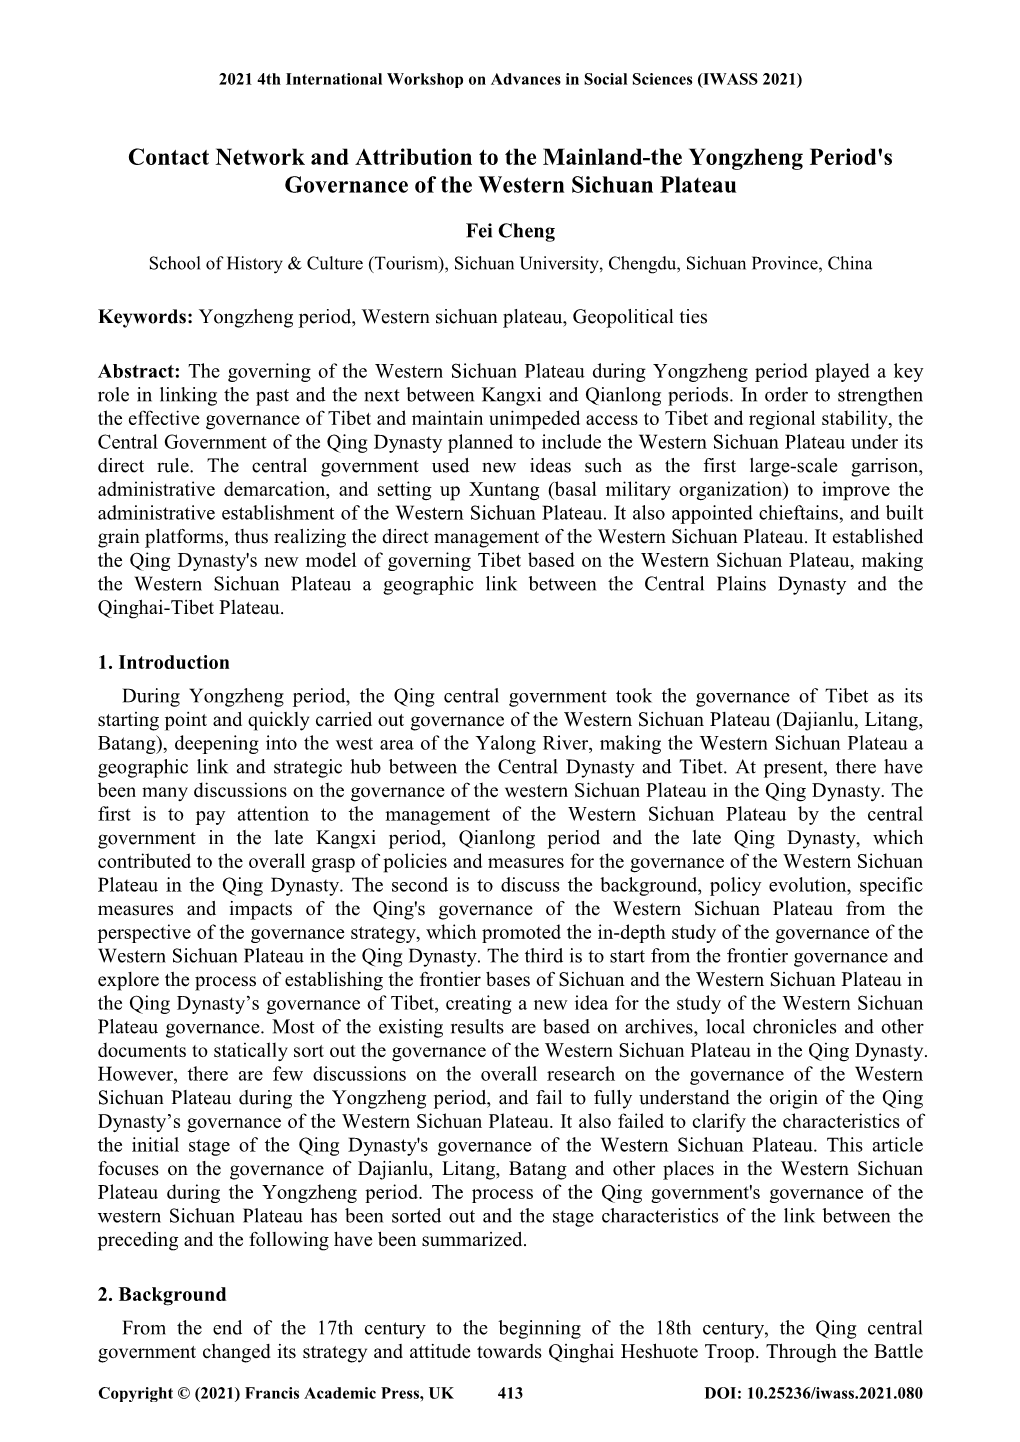 Contact Network and Attribution to the Mainland-The Yongzheng Period's Governance of the Western Sichuan Plateau